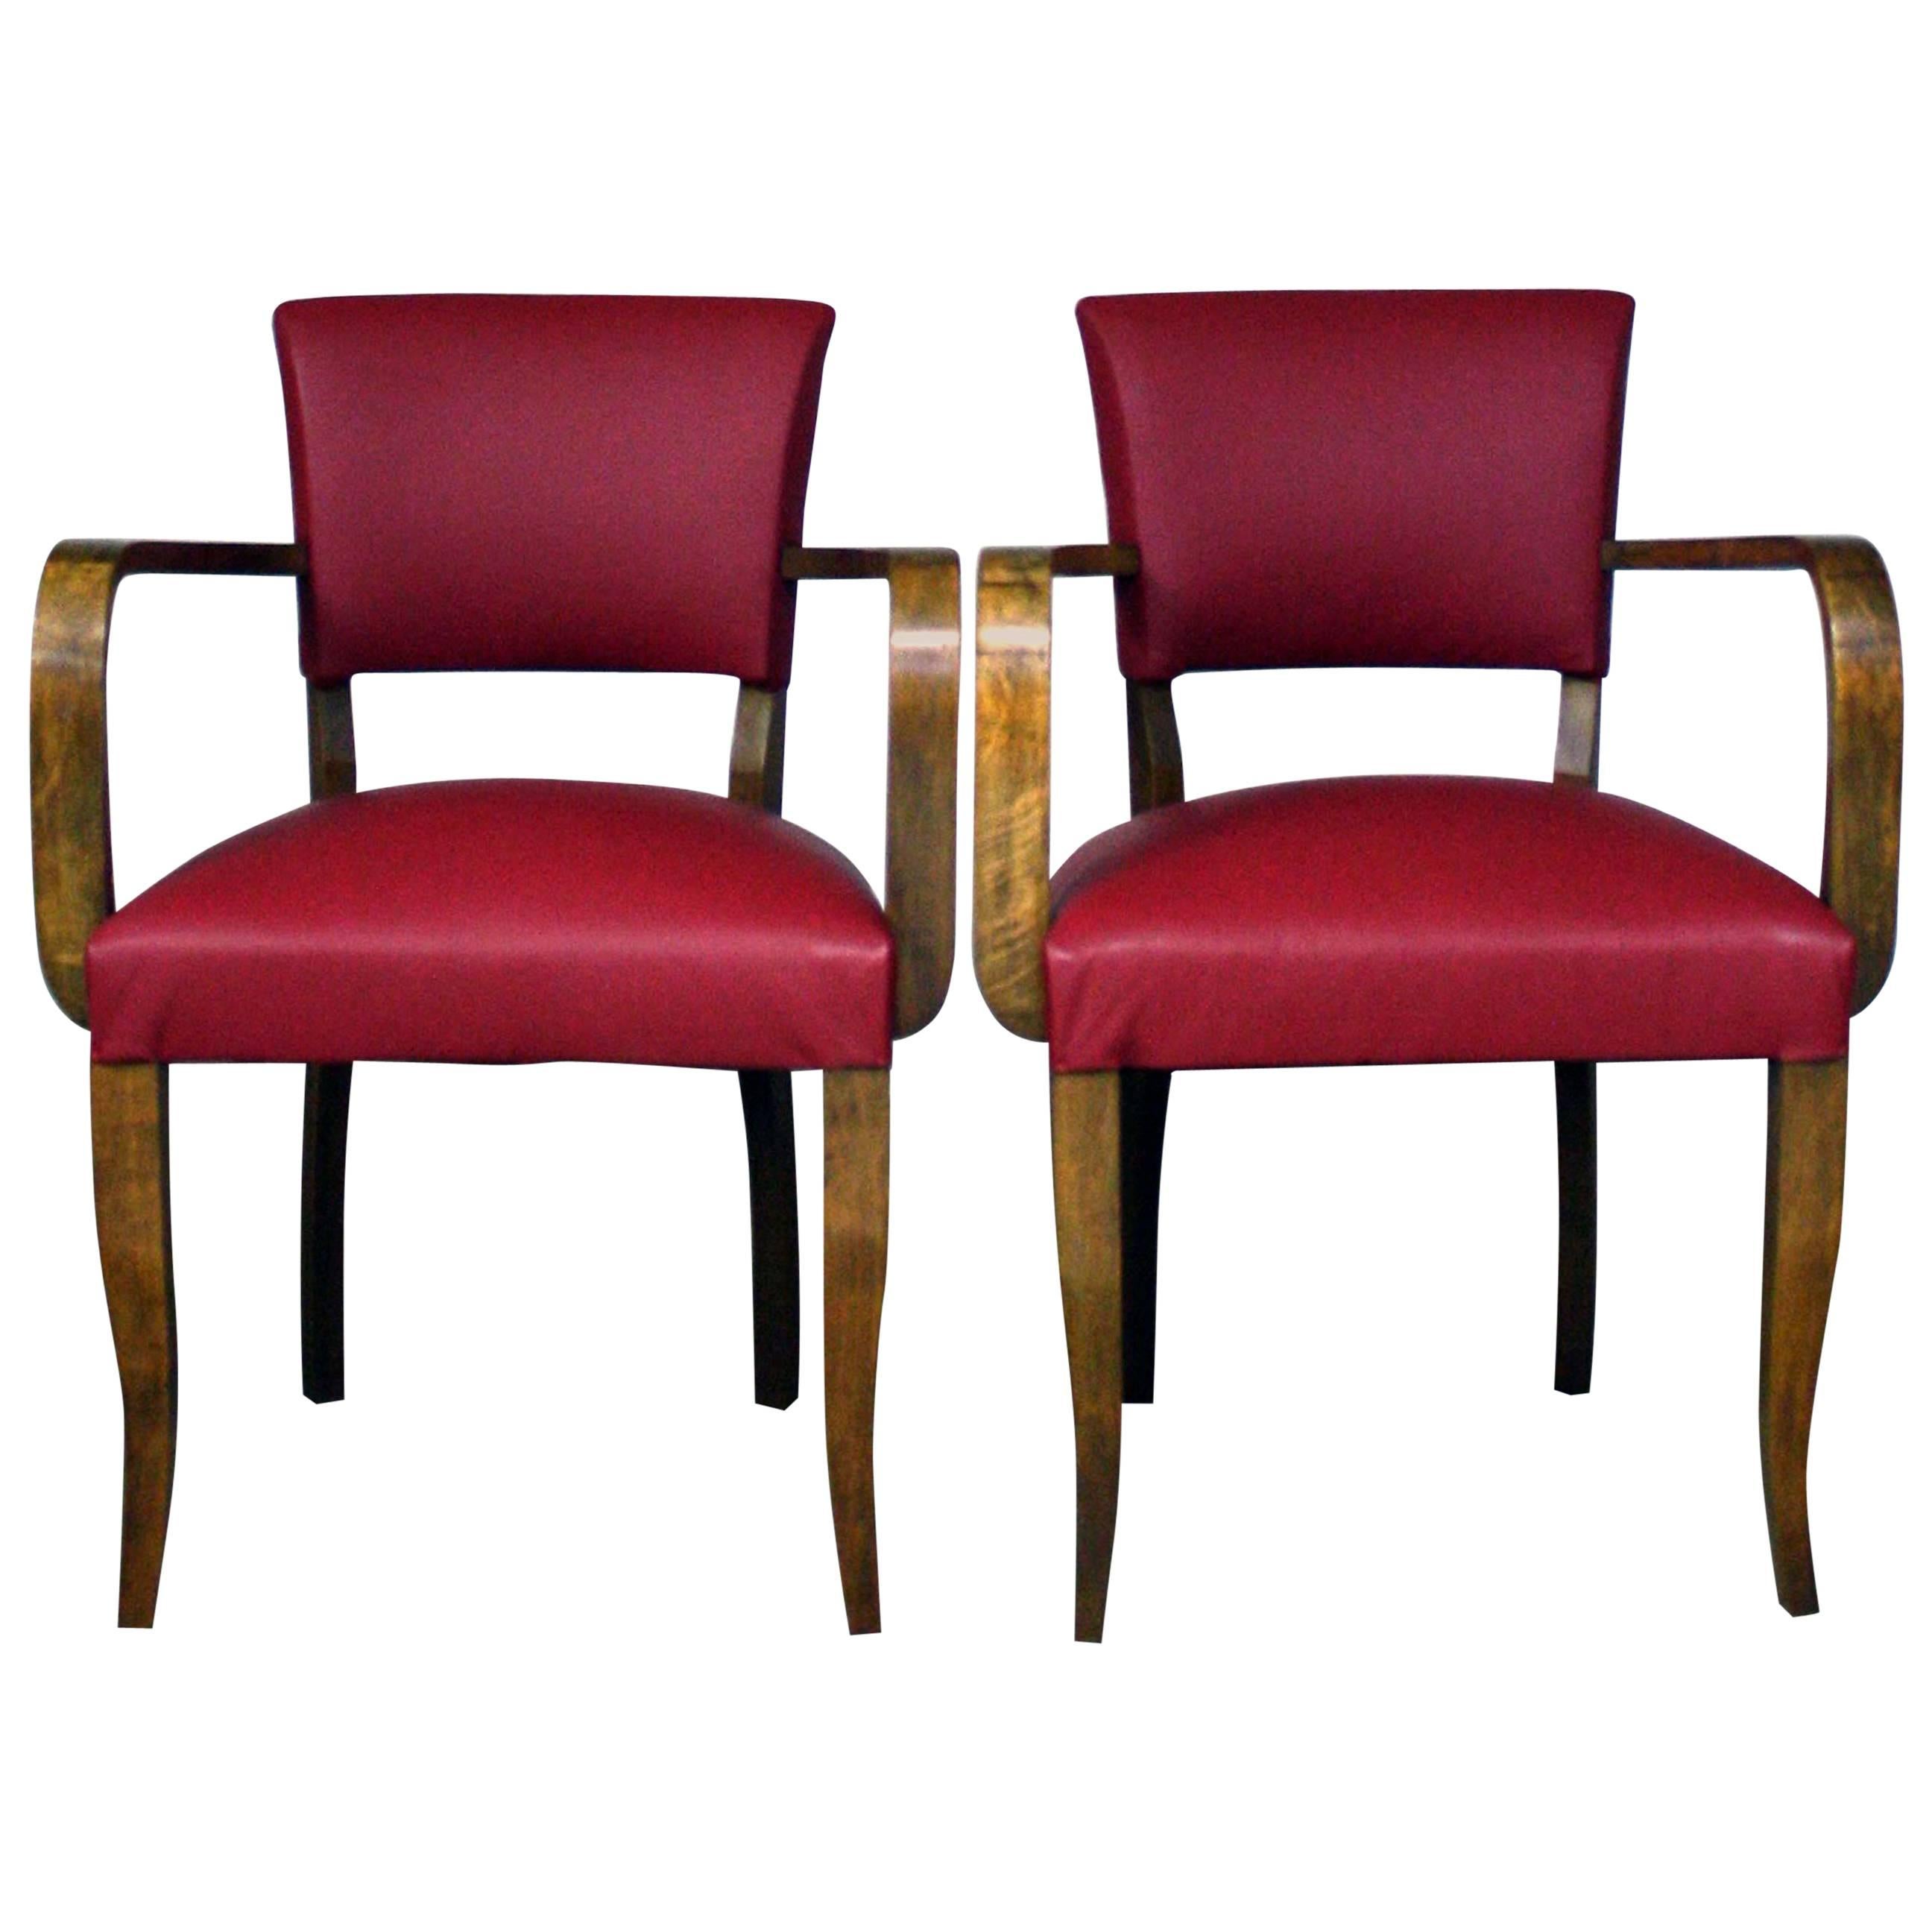 1930s Reupholstered Leather Bridge Chairs For Sale